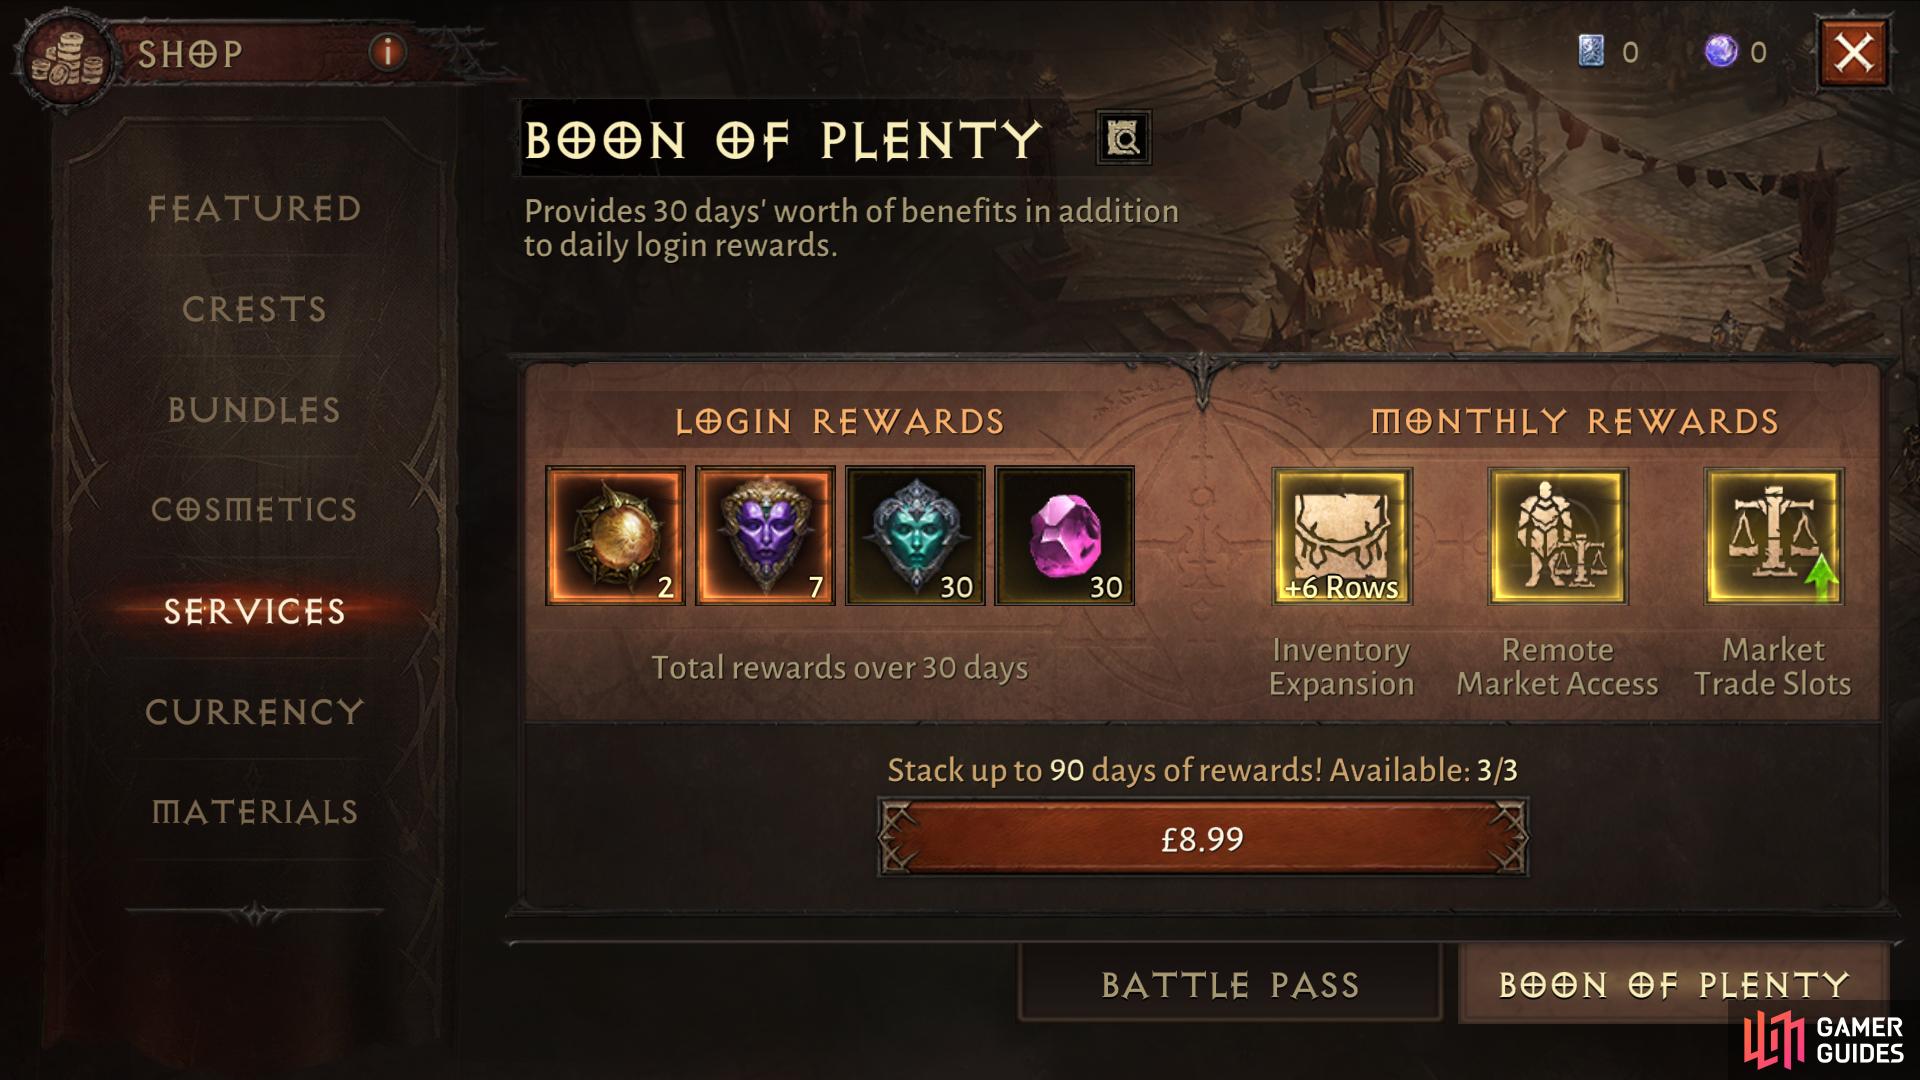 The Boon of Plenty can be found on the shop.